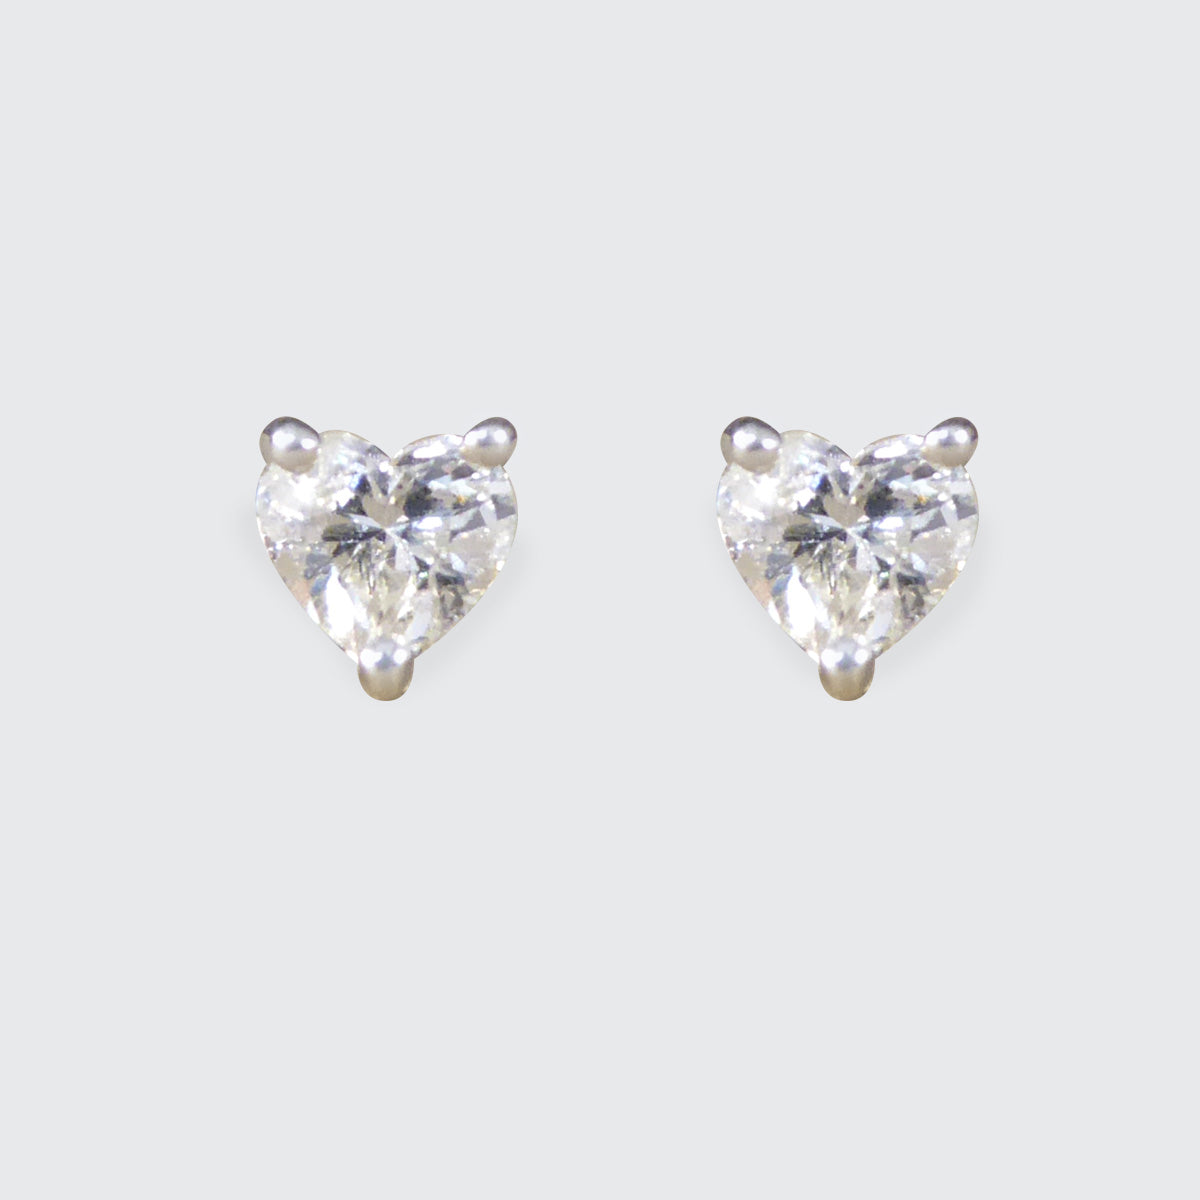 Heart Cut Diamond Earrings 0.81ct Total in Platinum Claw Set Studs